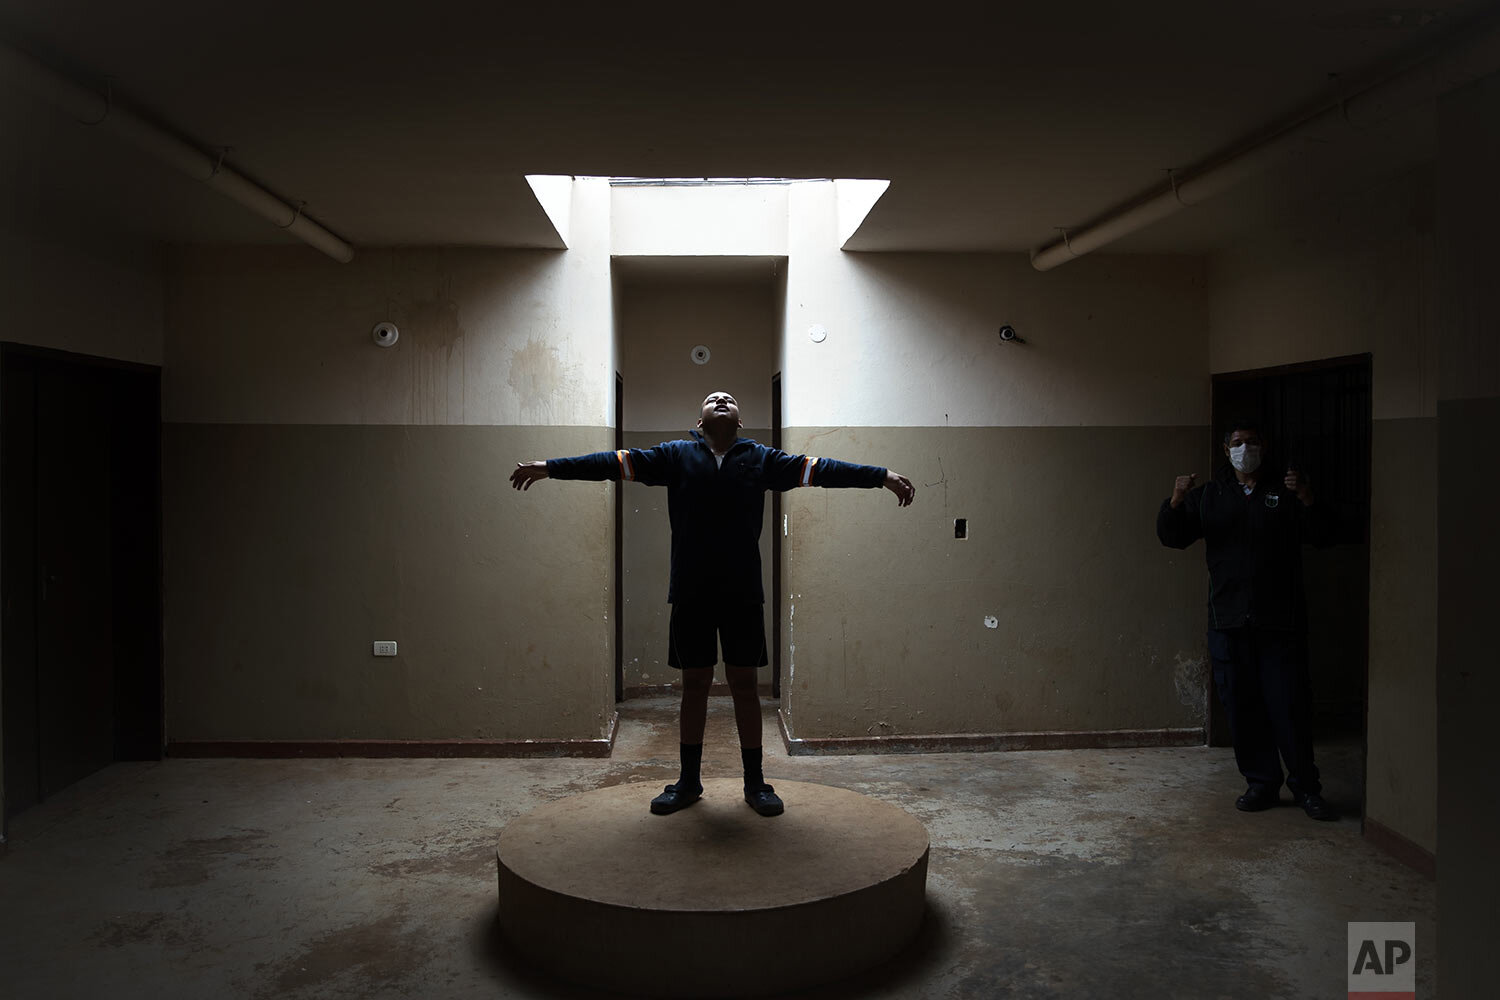  An inmate jokes around where the statue of a saint used to stand, as a guard talks on his radio at the Educational Center of Itagua for juvenile offenders in Itagua, Paraguay, Sept. 14, 2020. Visiting privileges were suspended at the start of the ne